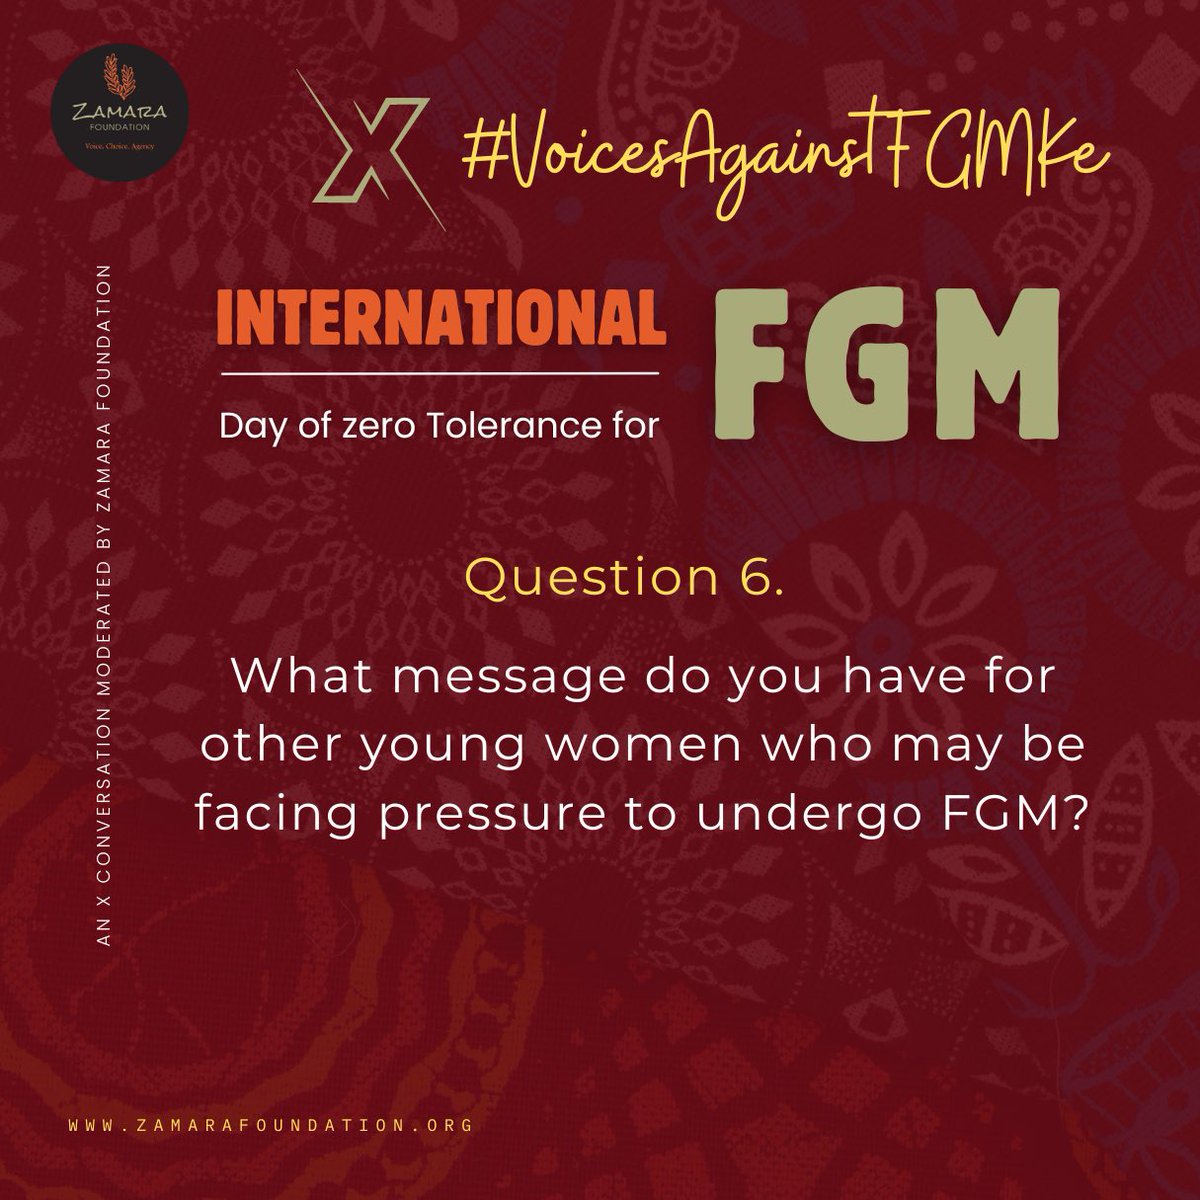 FGM is an atrocious act that might scar you for life,so do not fold to the pressure ,you are stronger than you think. @Zamara_fdn #VoicesAgainstFGMKe #ZamaraVoices